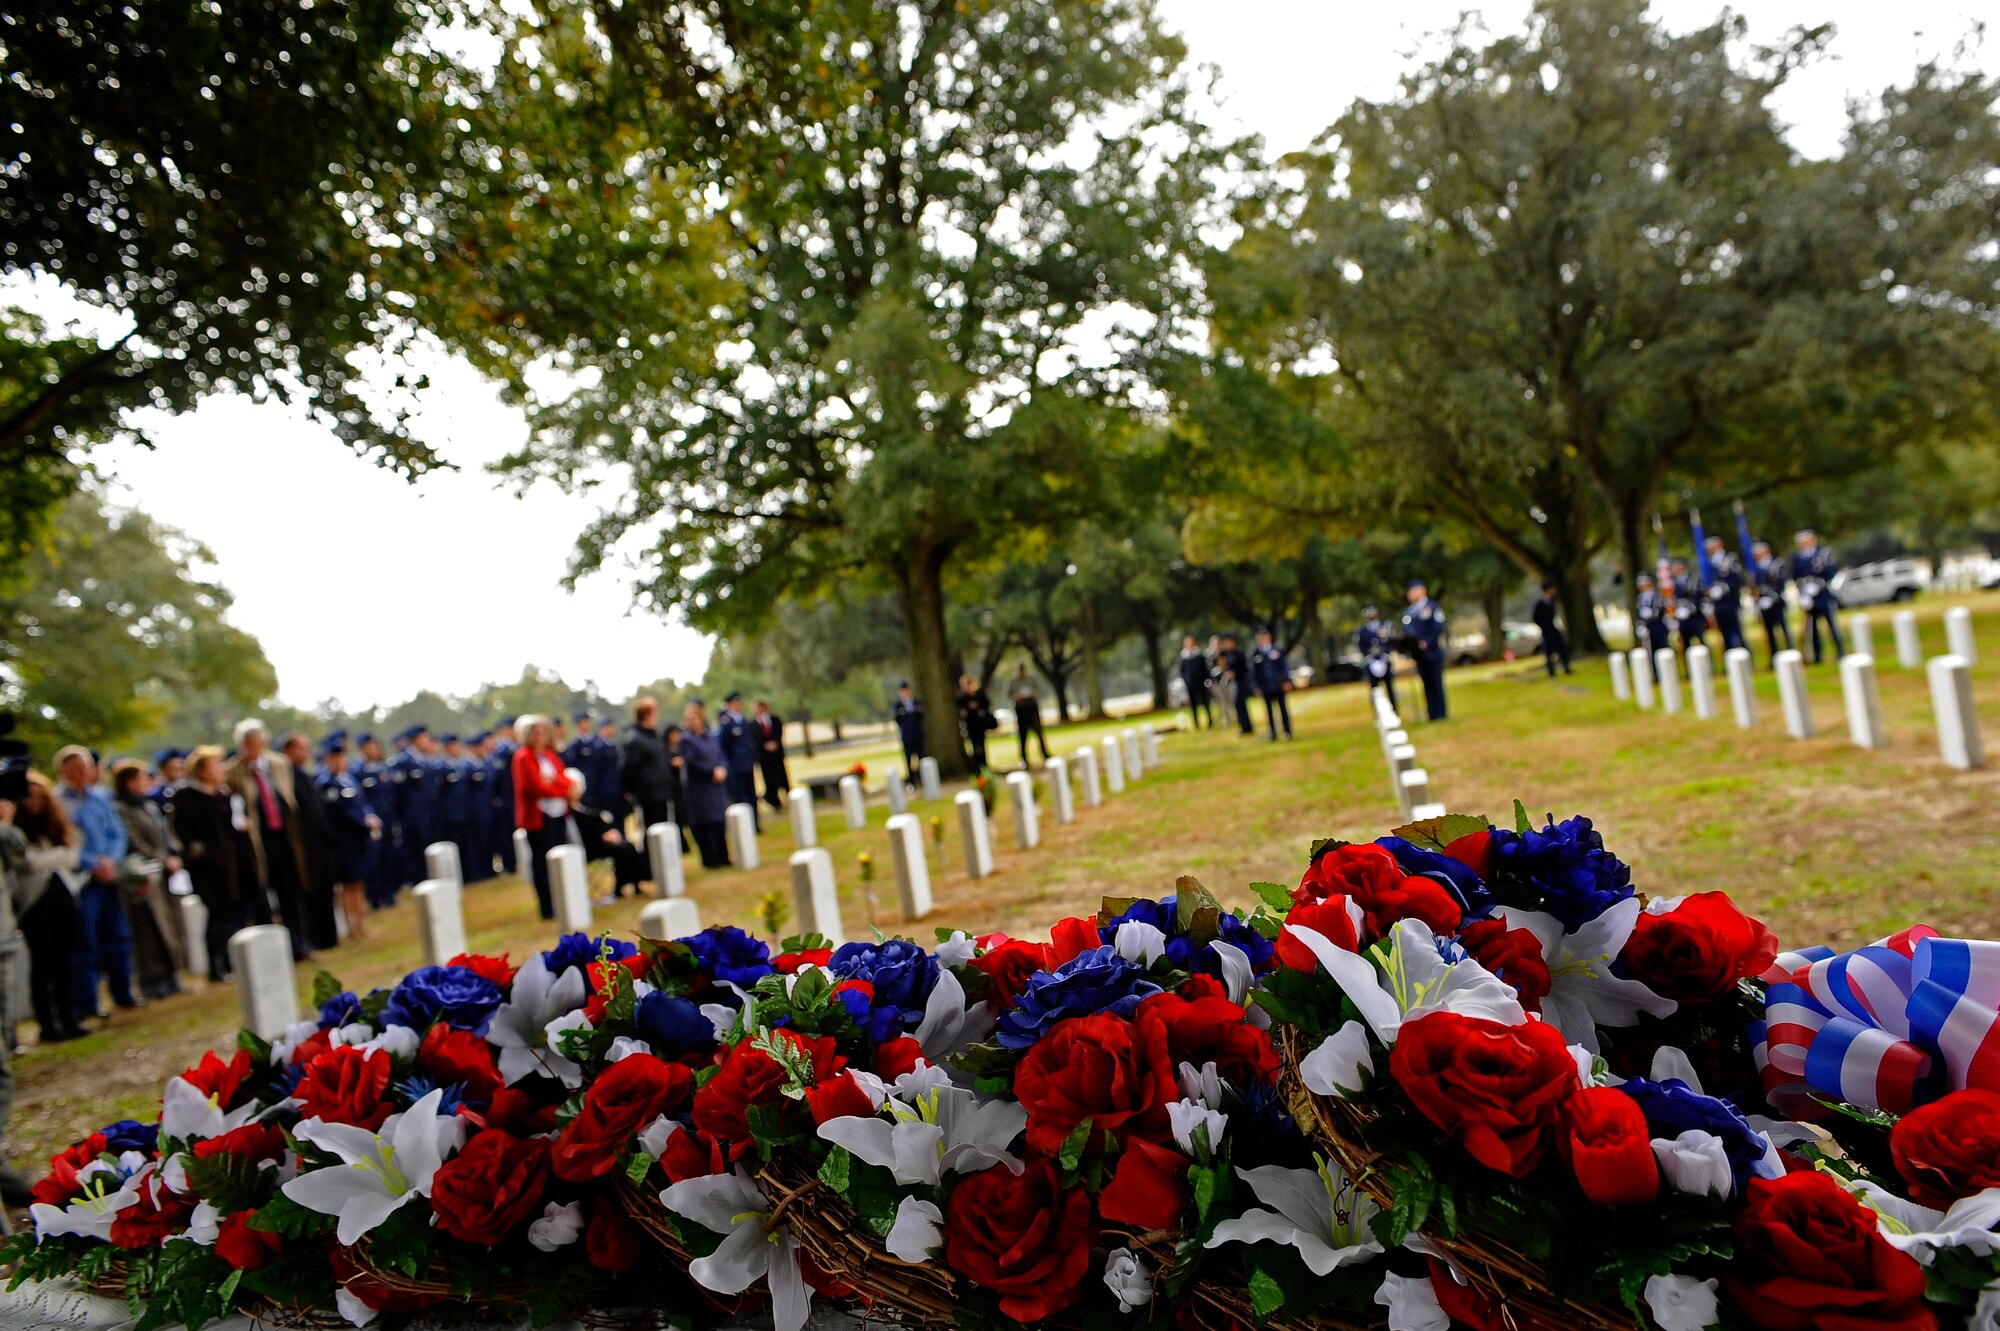 Members of the 1st Special Operations Wing and family of the Spirit 03 crew attend a wreath-laying ceremony Jan. 31, 2011, at the Barrancas National Cemetery, Pensacola Naval Air Station, Fla. The ceremony marked the 20th anniversary of when 14 Airmen lost their lives when Spirit 03, an AC-130H Spectre gunship, was shot down by enemy fire in support of Operation Desert Storm Jan. 31, 1991. (U.S. Air Force photo by Staff Sgt. Julianne M. Showalter/Released)